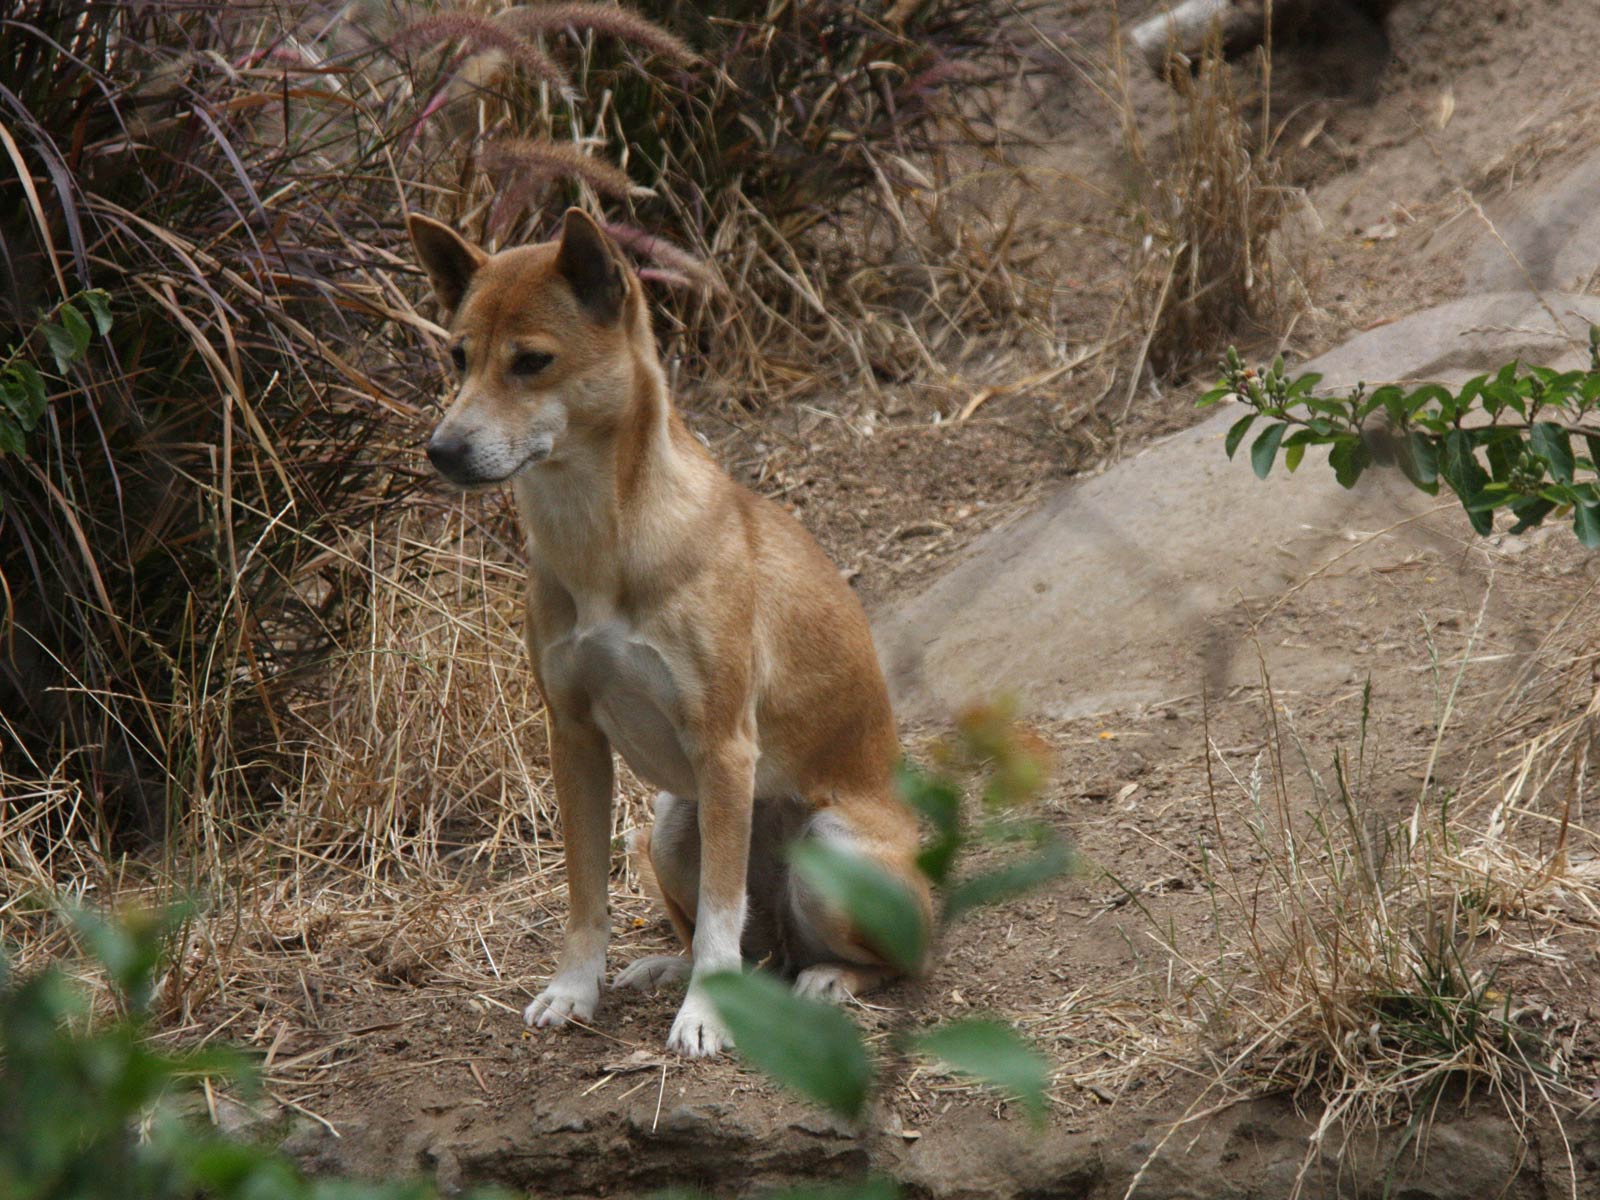 free New Guinea Singing Dog wallpaper wallpapers download